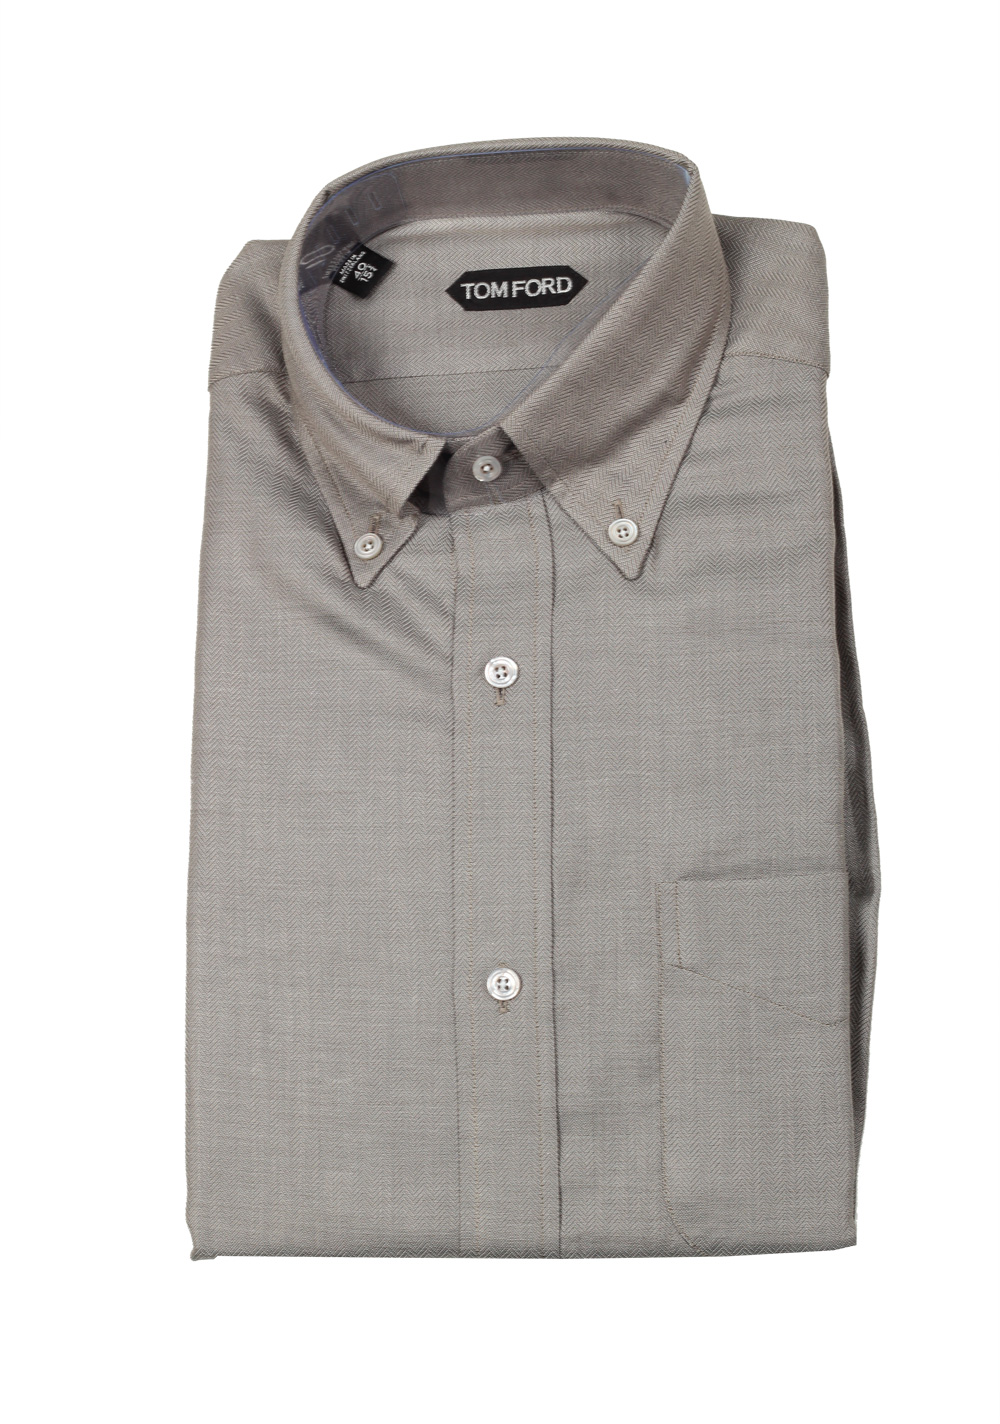 TOM FORD Solid Gray Button Down Dress Shirt Size 40 / 15,75 U.S. | Costume Limité